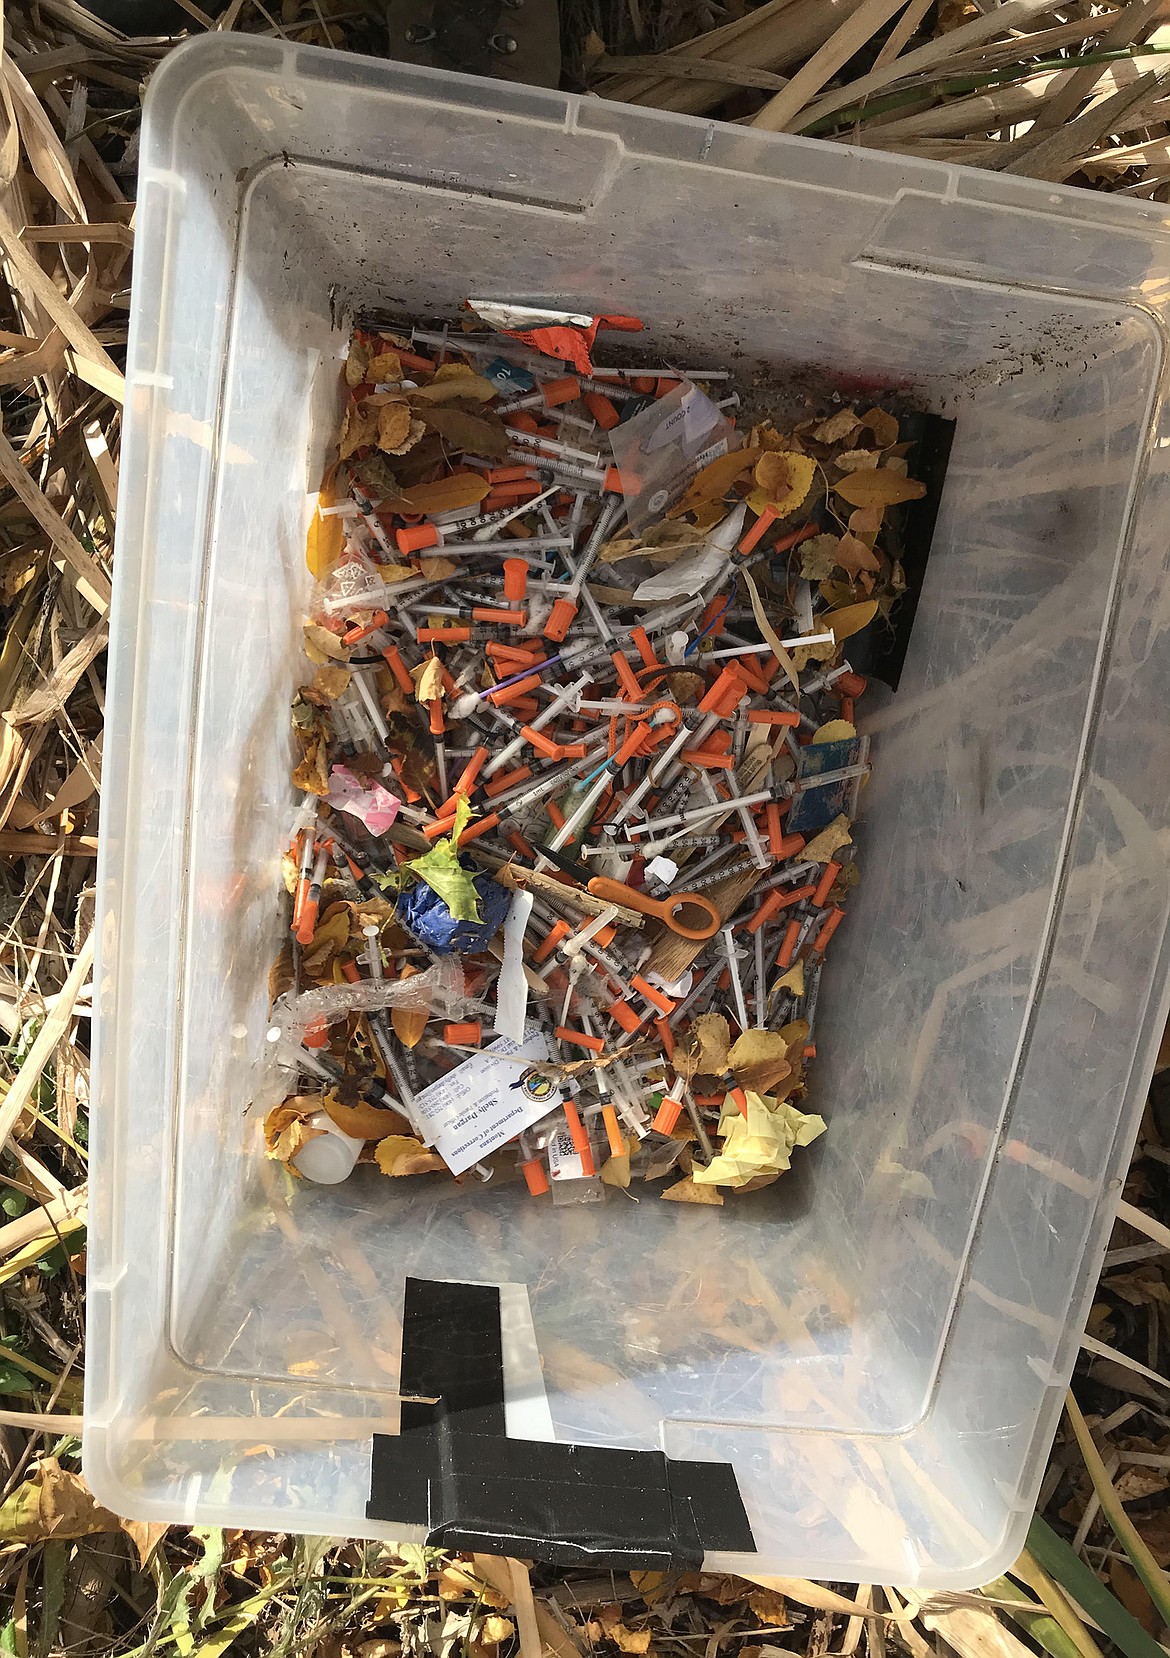 This box containing more than 200 used needles was found on the fringes of Lawrence Park Saturday. (photo provided by Ben Long)